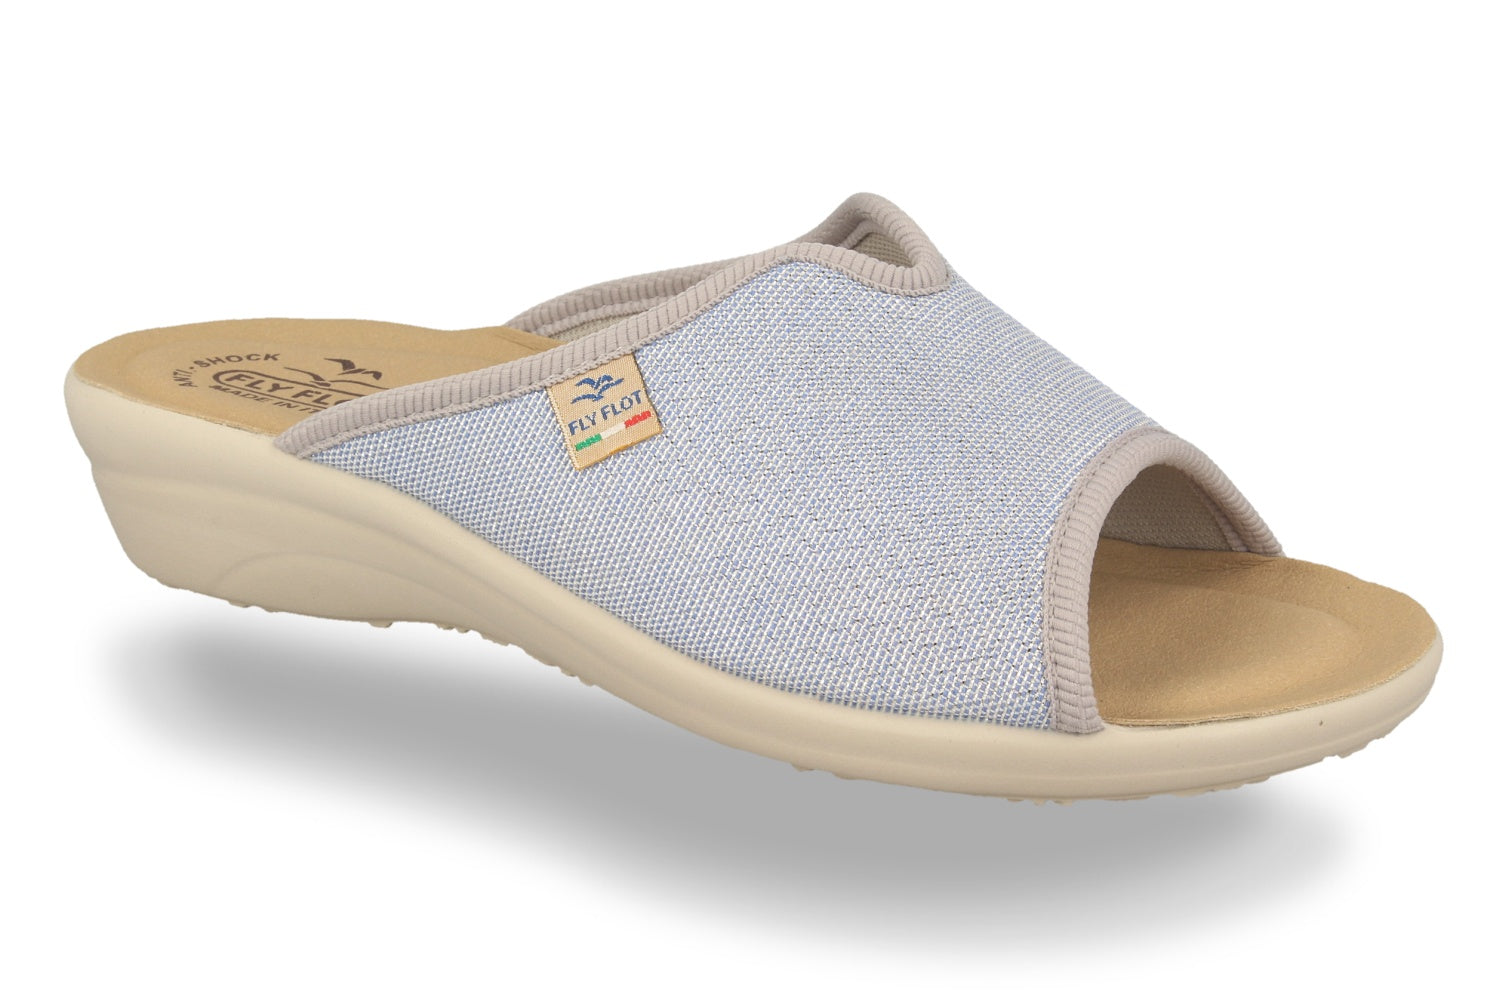 See the Soft Microfiber Cloth Slide Women Sandals in the colour BEIGE, available in various sizes